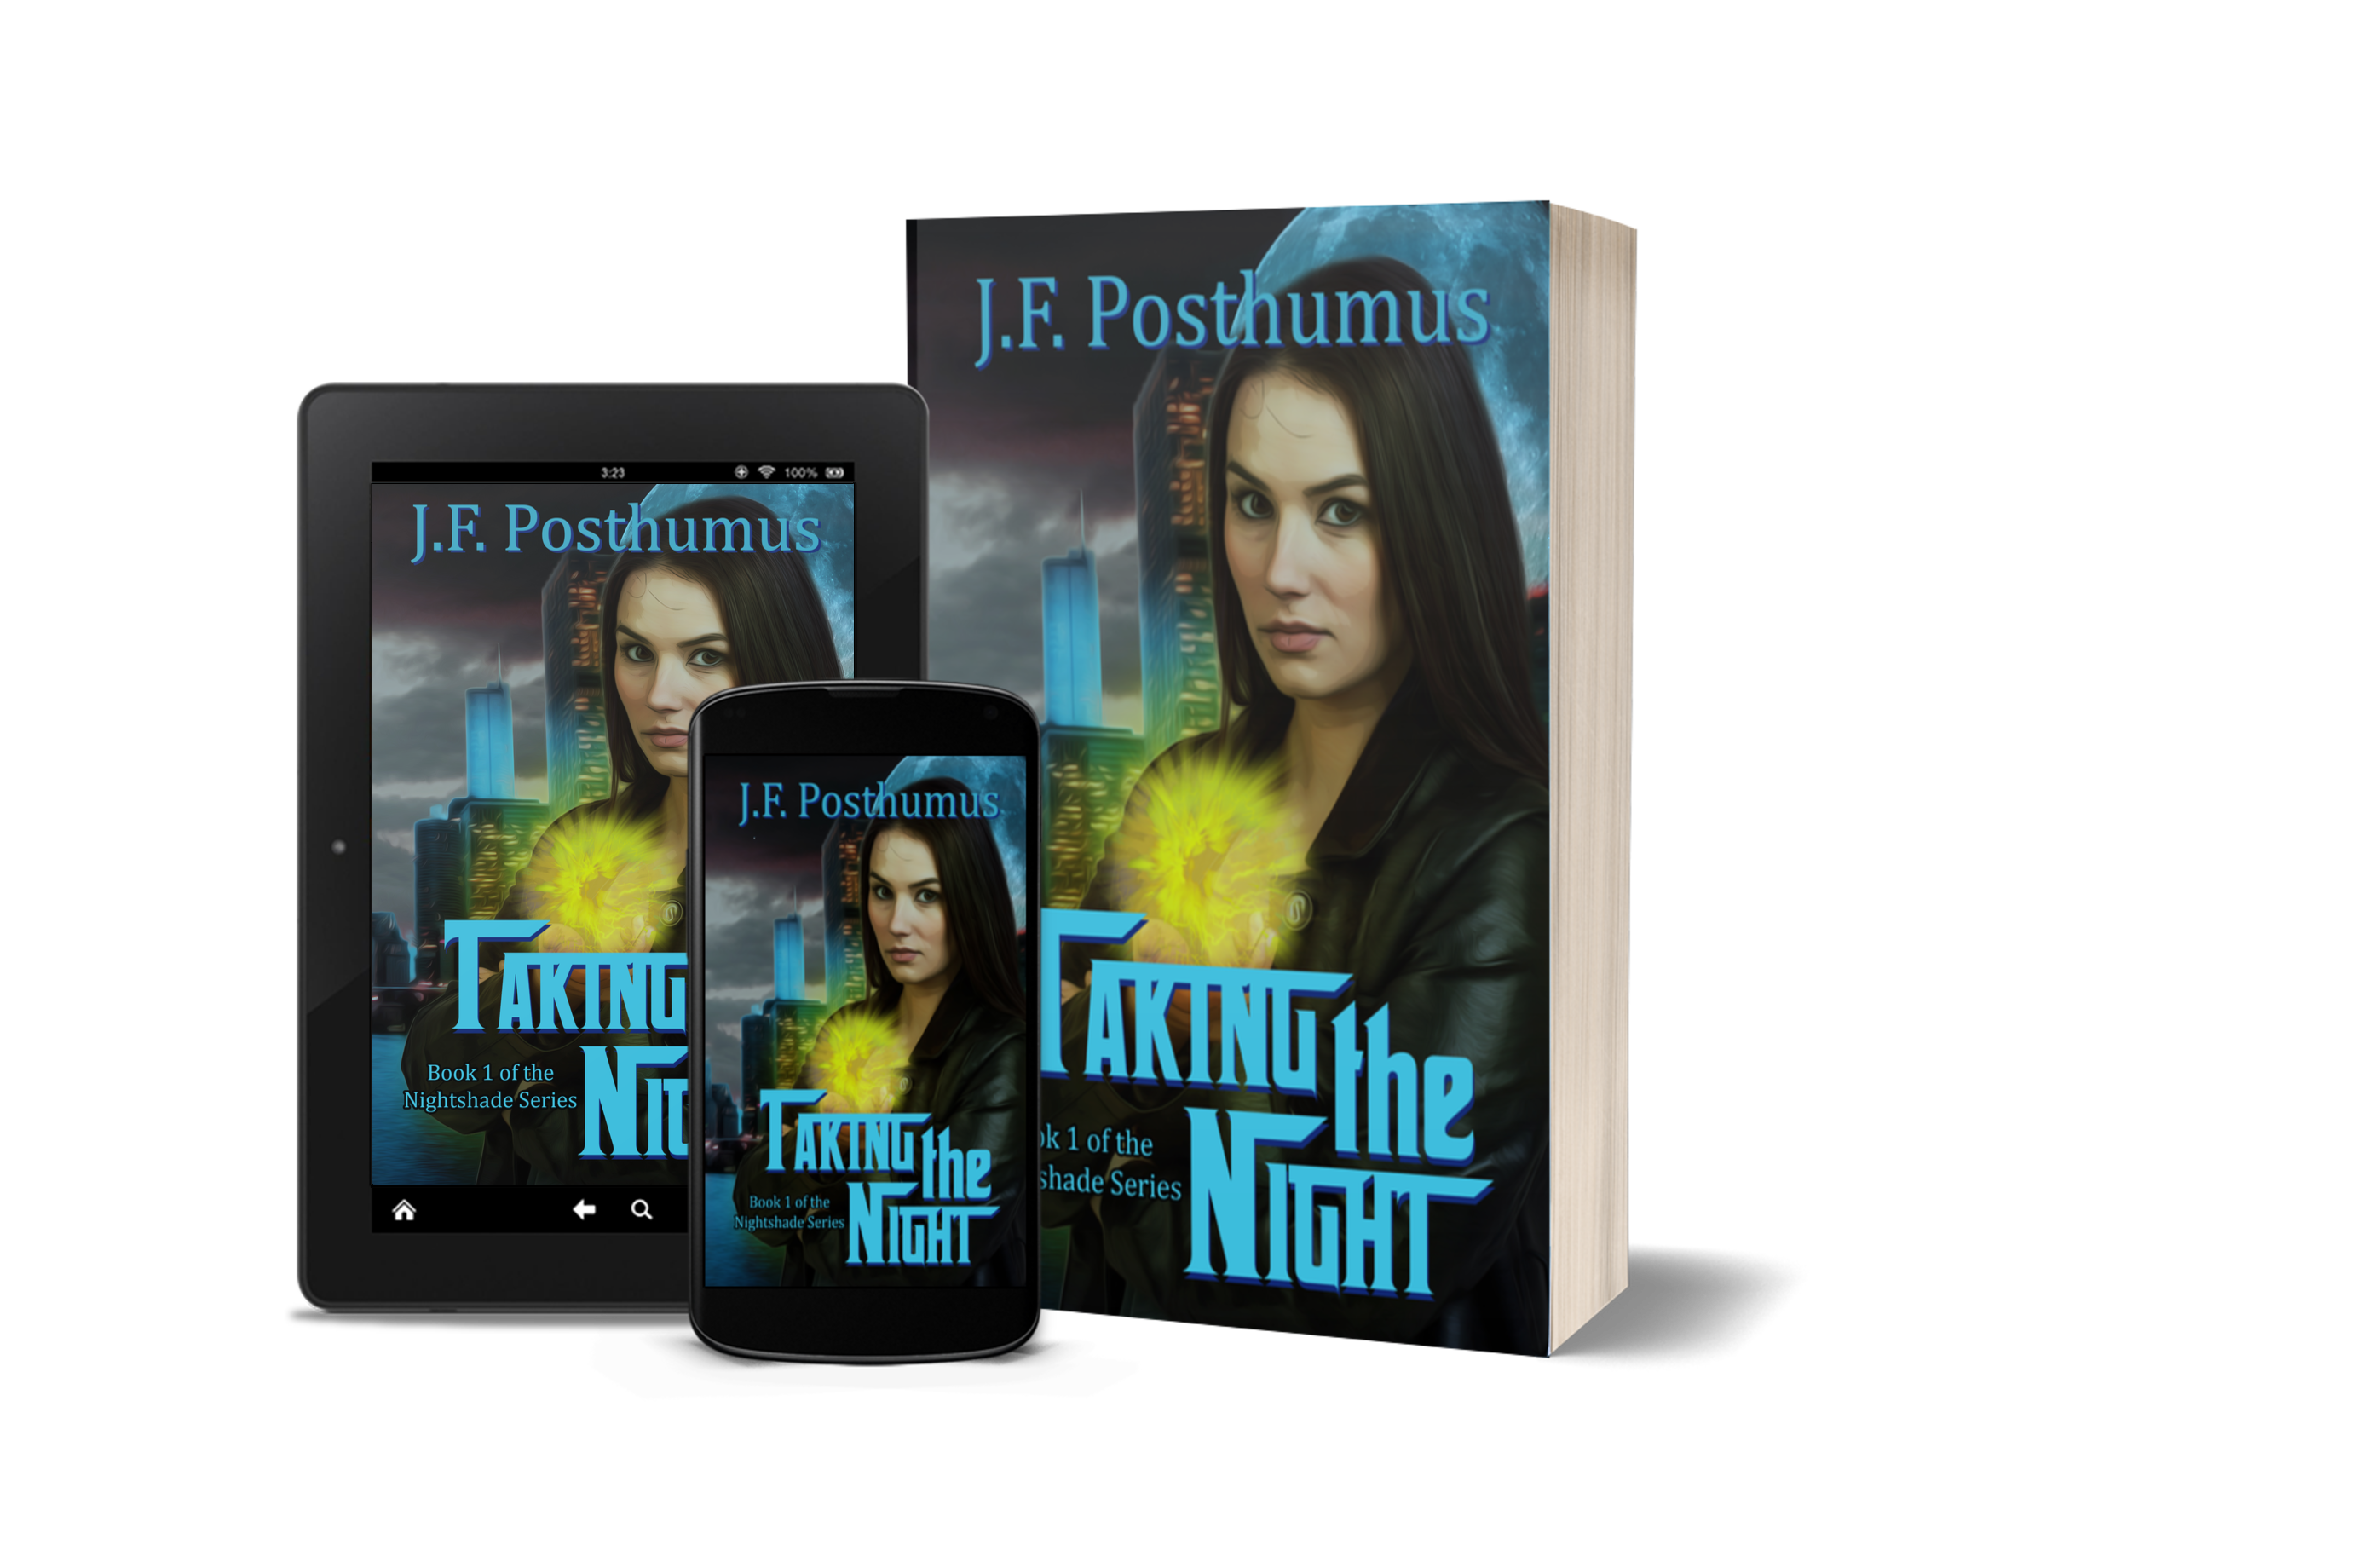 Magic and the Mob don’t usually mix well. But to survive, Selia Lascari has made both work in her favor… Taking the night by J.F. Posthumus is live and available on Amazon or where most books are sold!